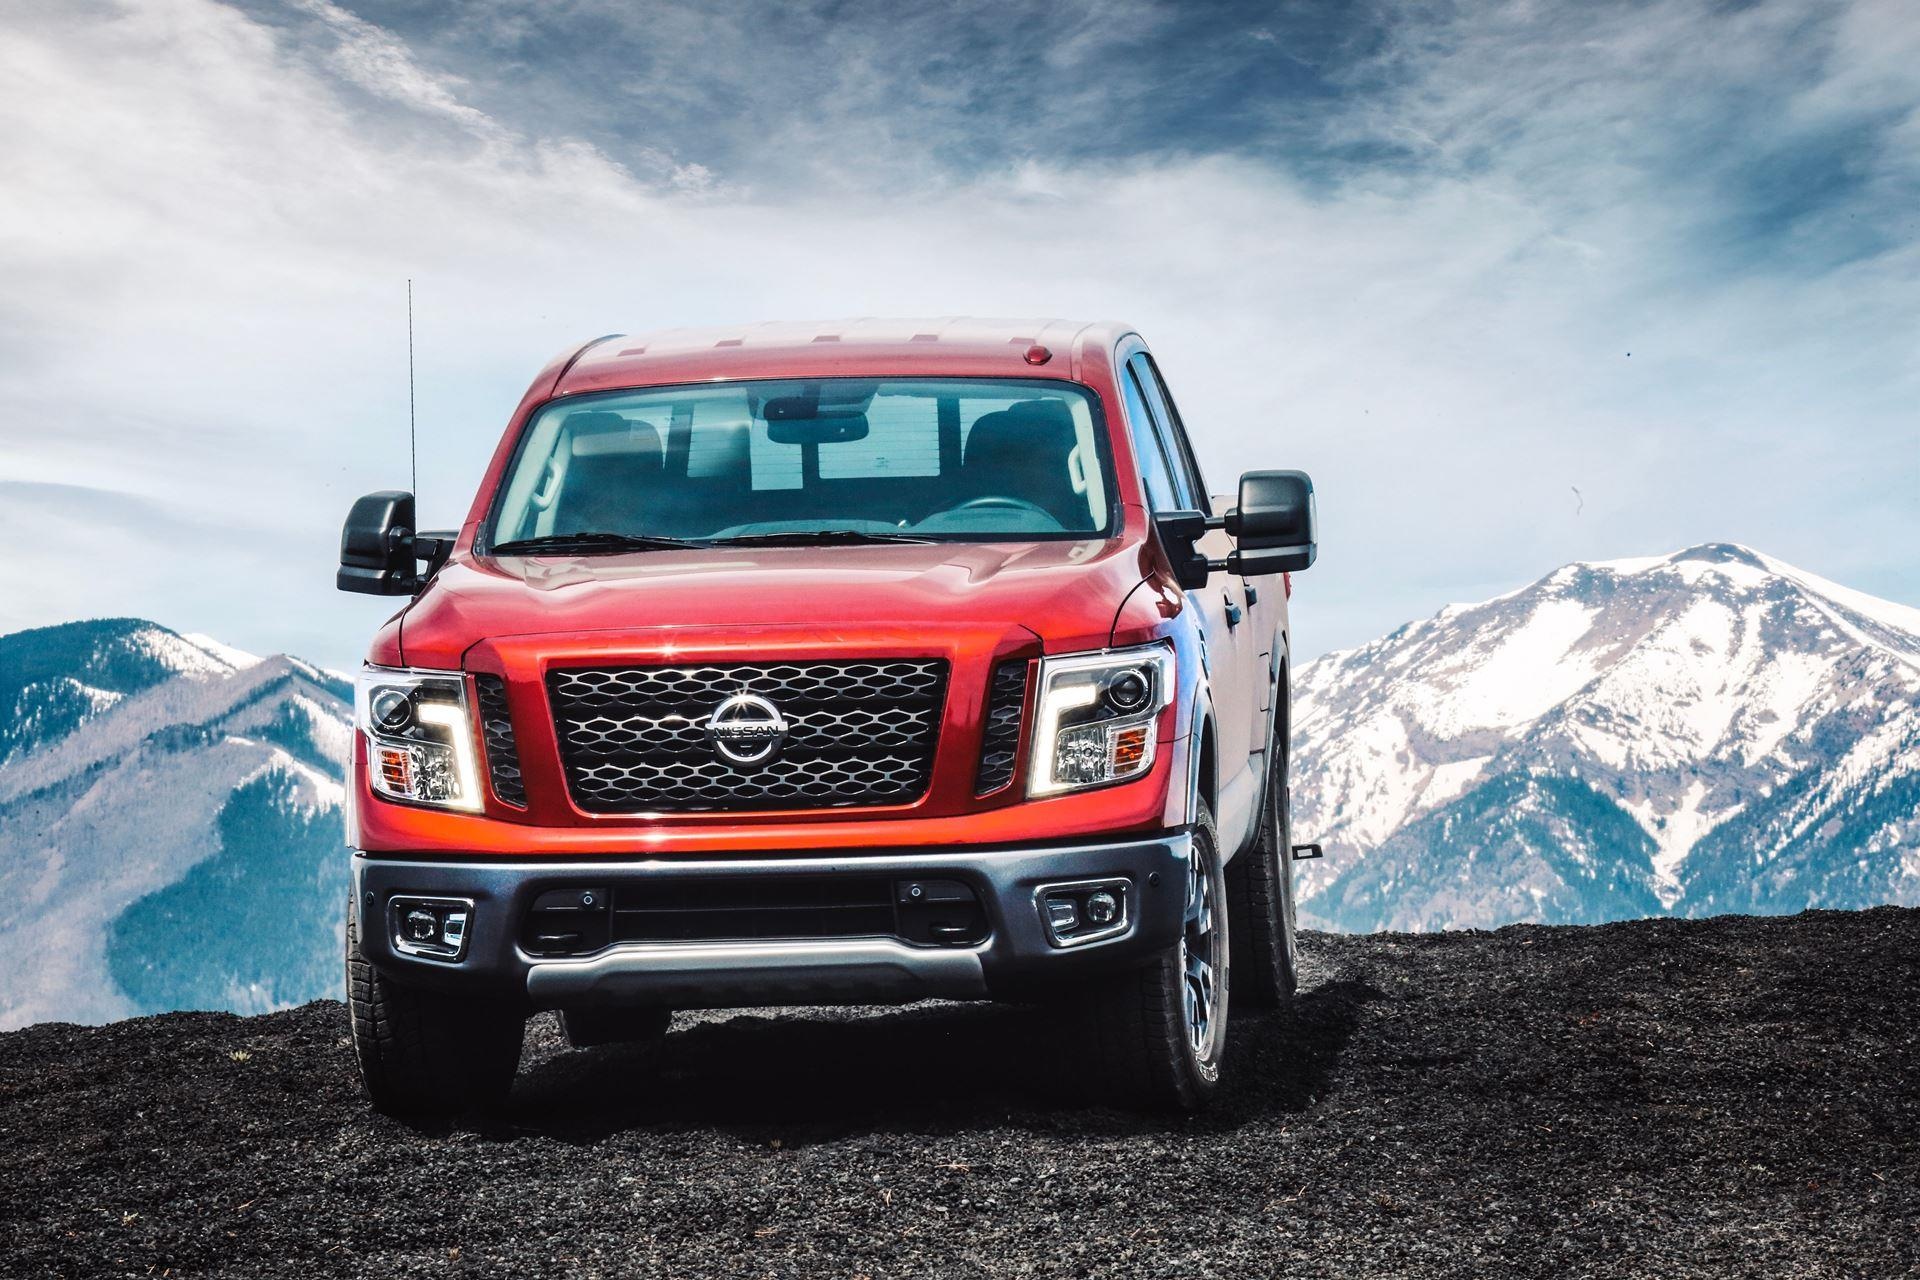 Nissan Titan, Aggressive and muscular, Cutting-edge technology, Unmatched capability, 1920x1280 HD Desktop